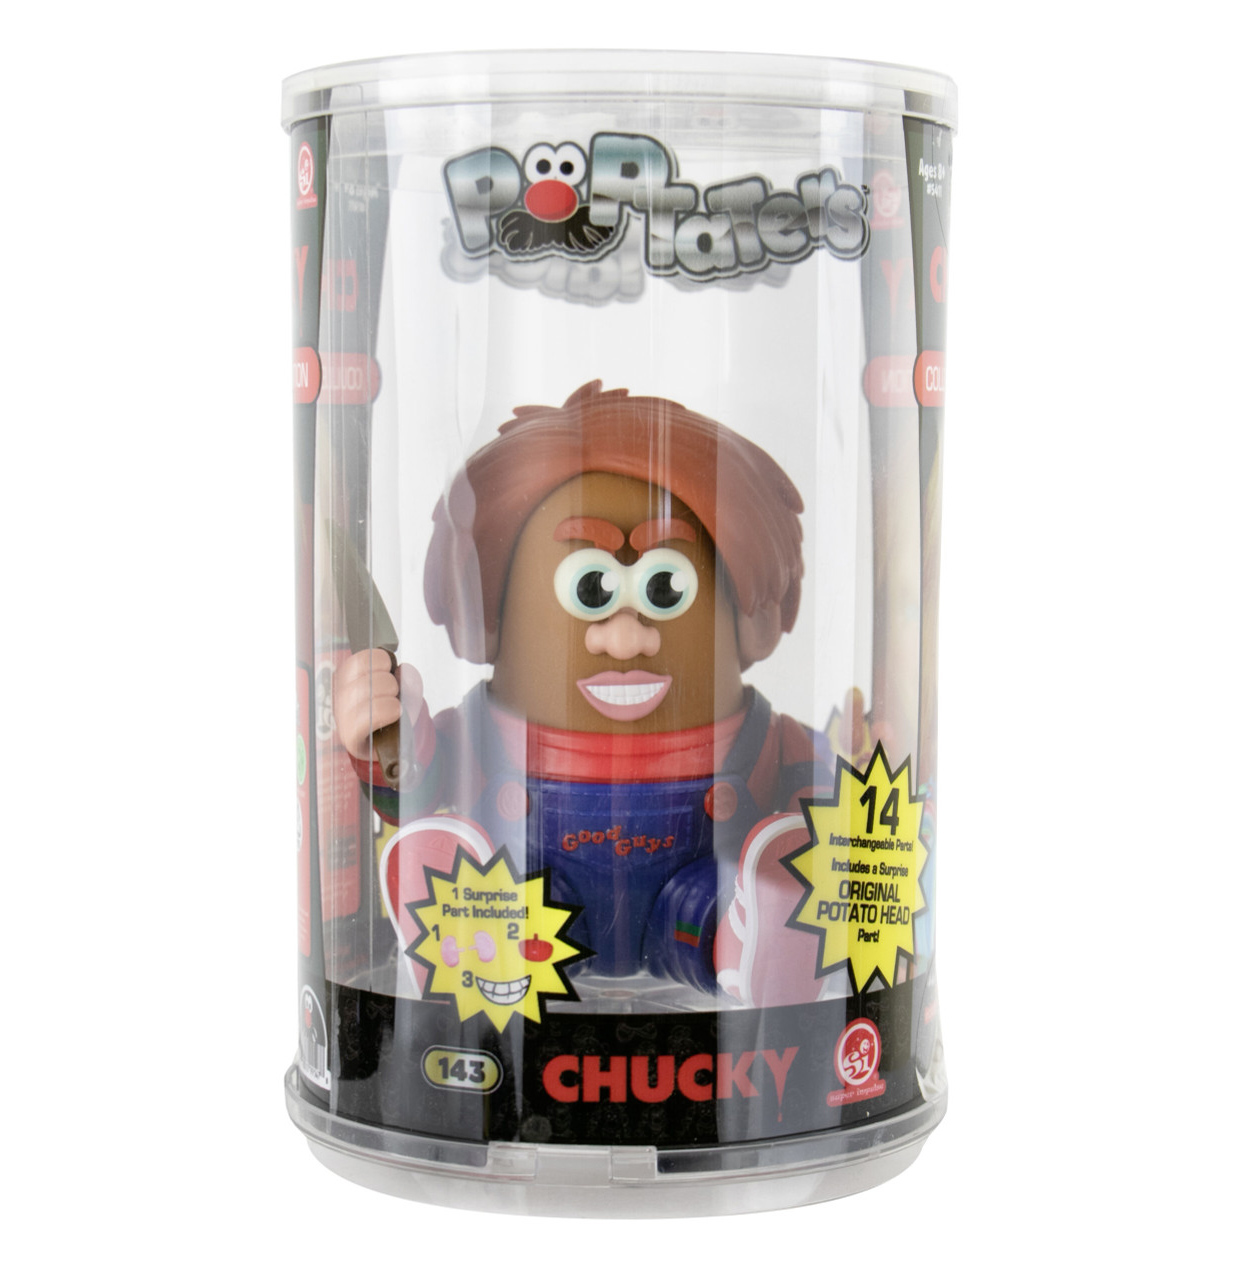 Chucky Child's Play PopTaters